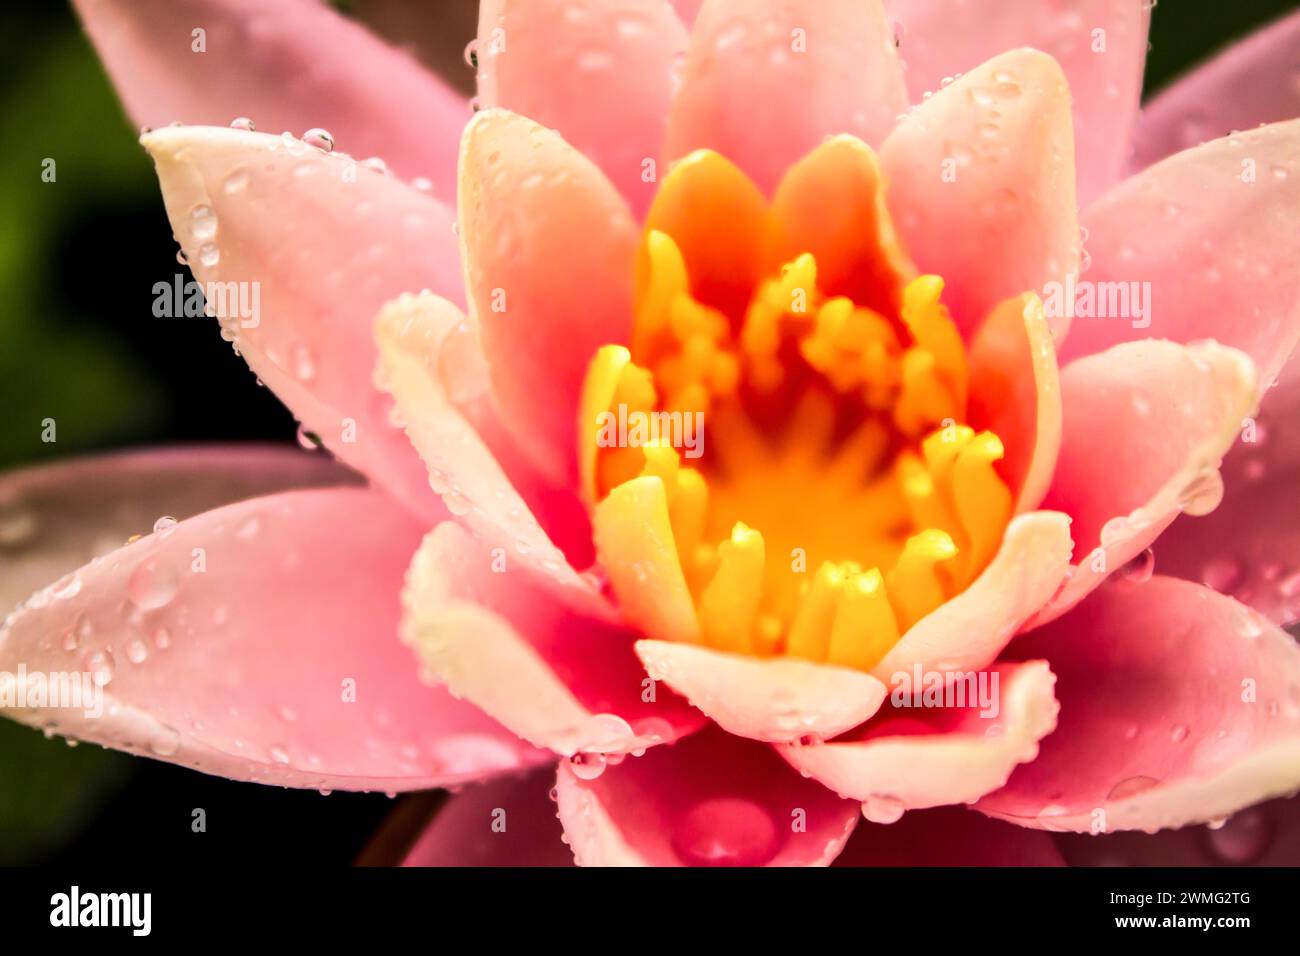 Close-up view of a flower of a pink waterlily, covered in water droplets, of the Nymphae family. Stock Photo